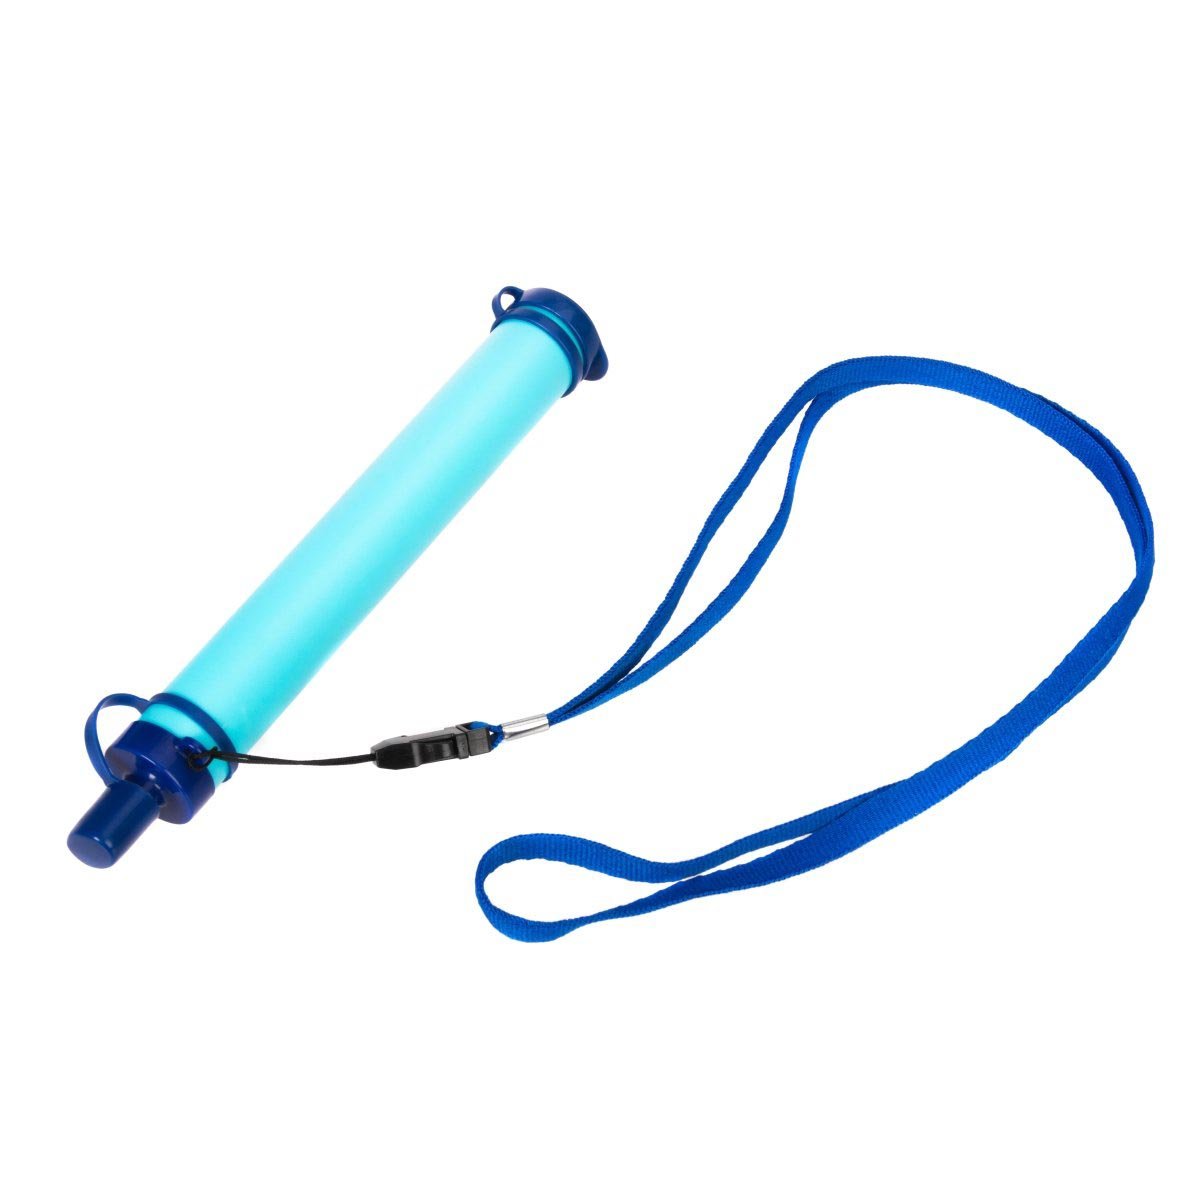 Personal Portable Water Filter for Camping, Water Purifier